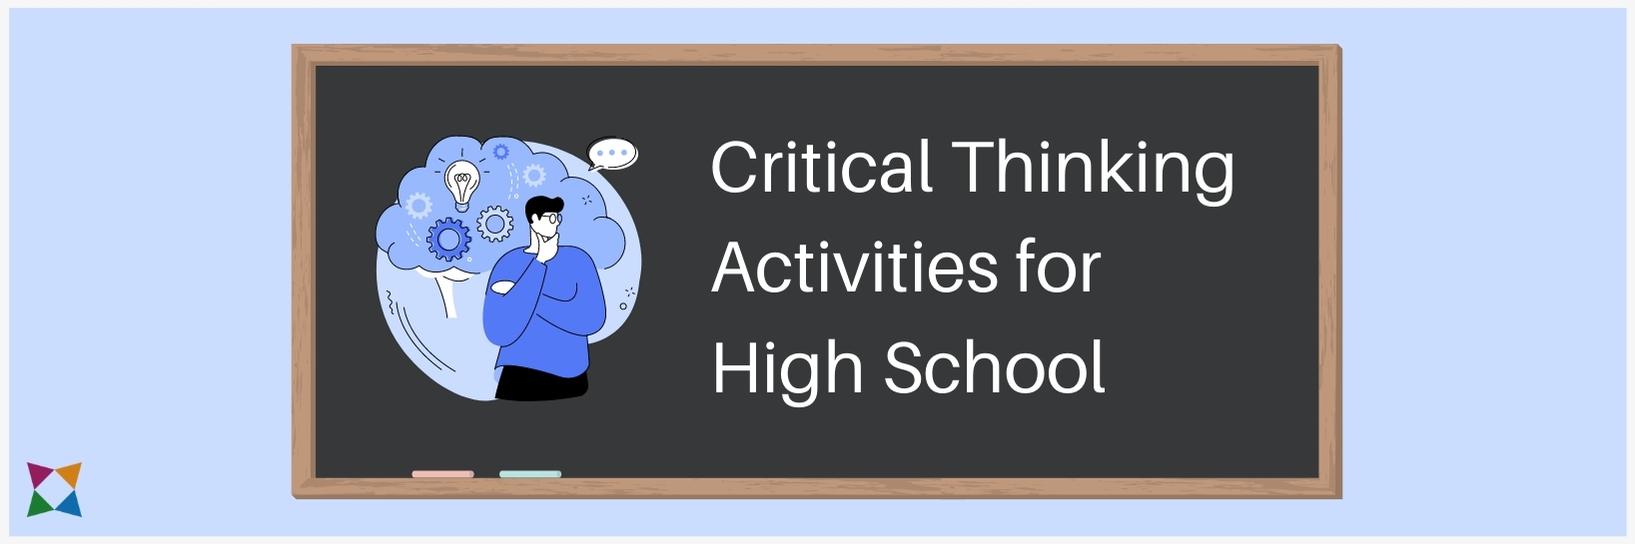 4 Best Critical Thinking Activities for High School